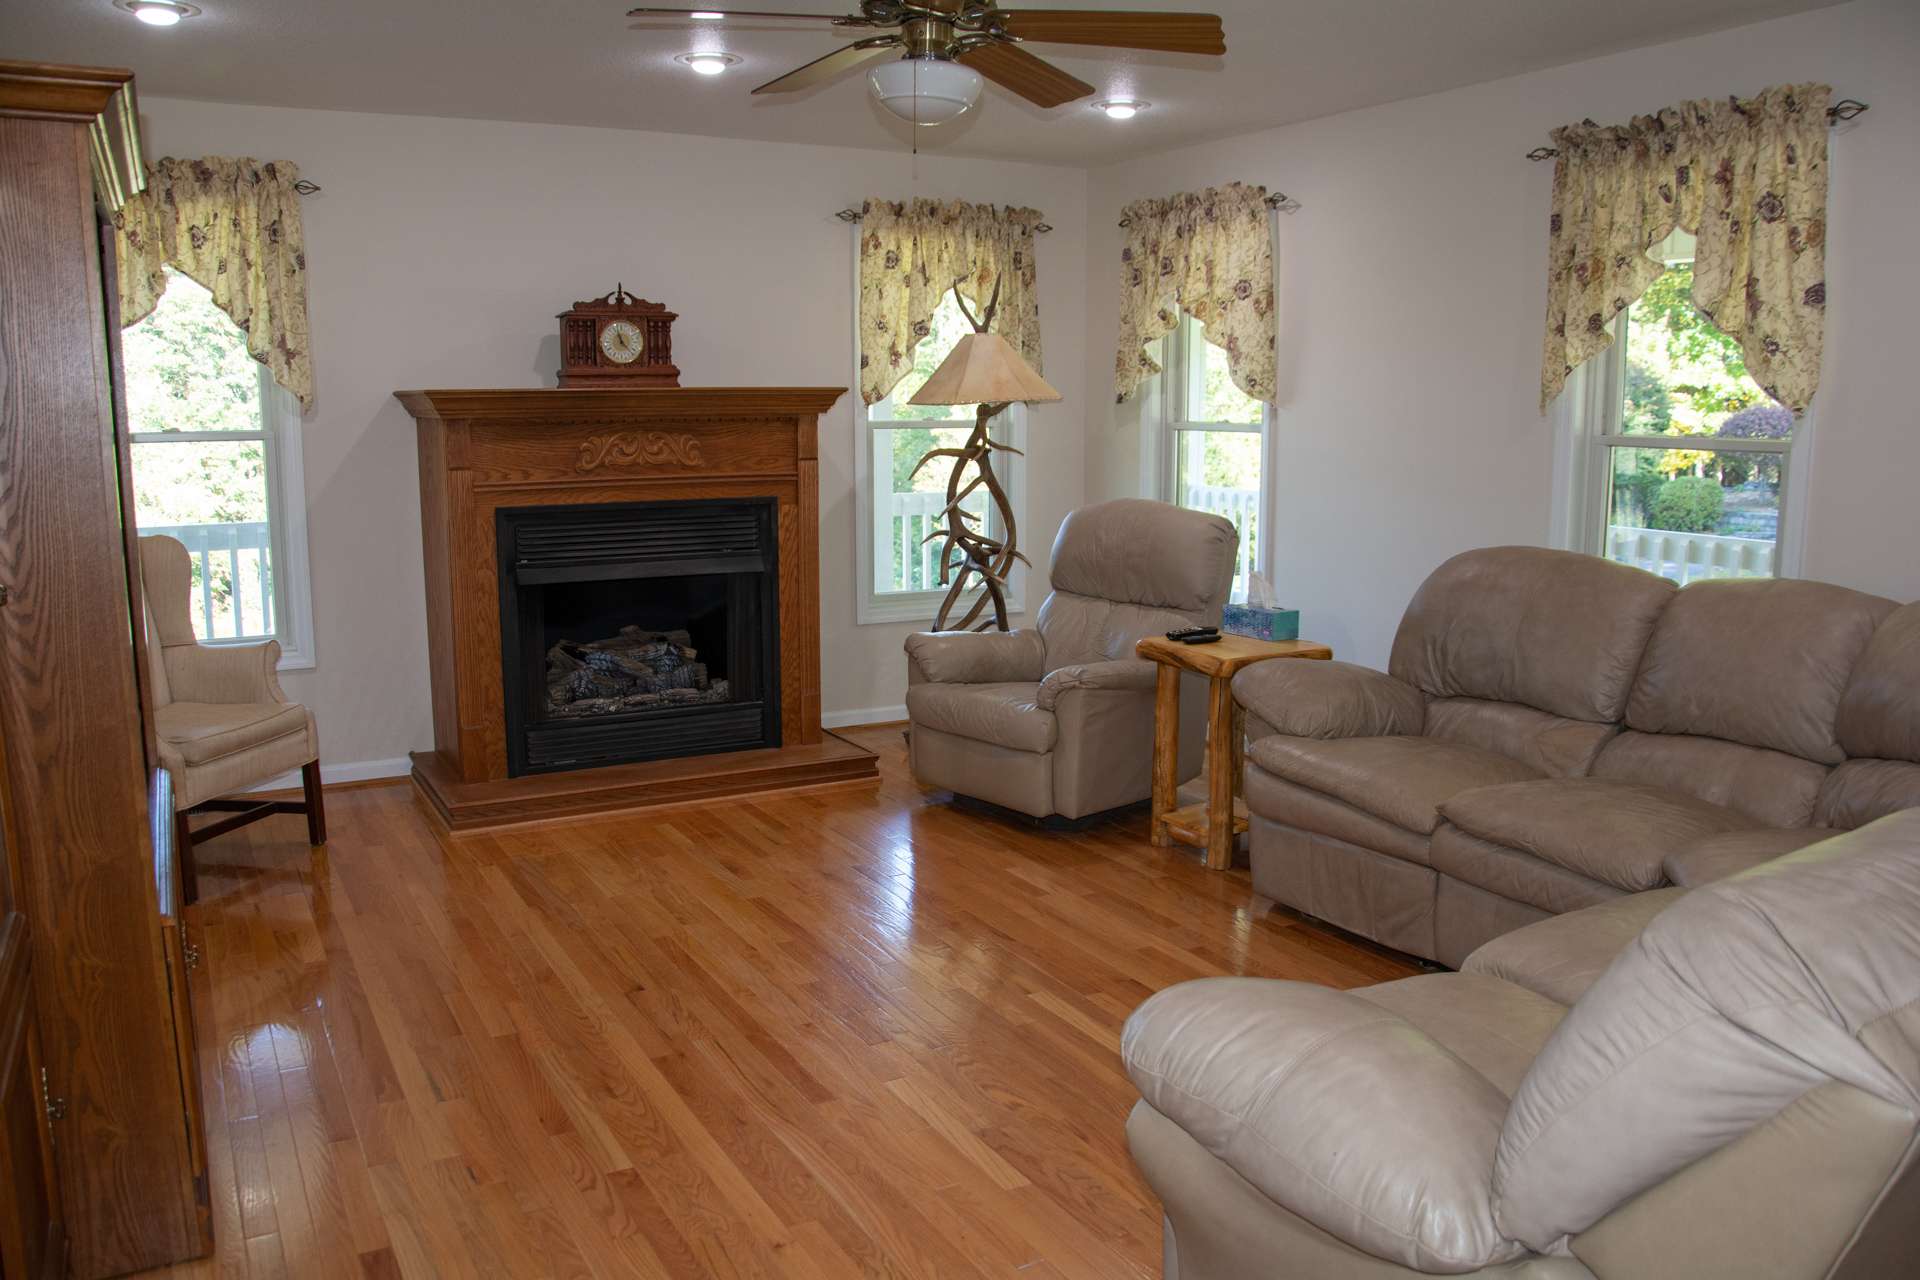 Spacious living room features gleaming oak flooring, fireplace with gas logs and lots of windows making it nice & bright.